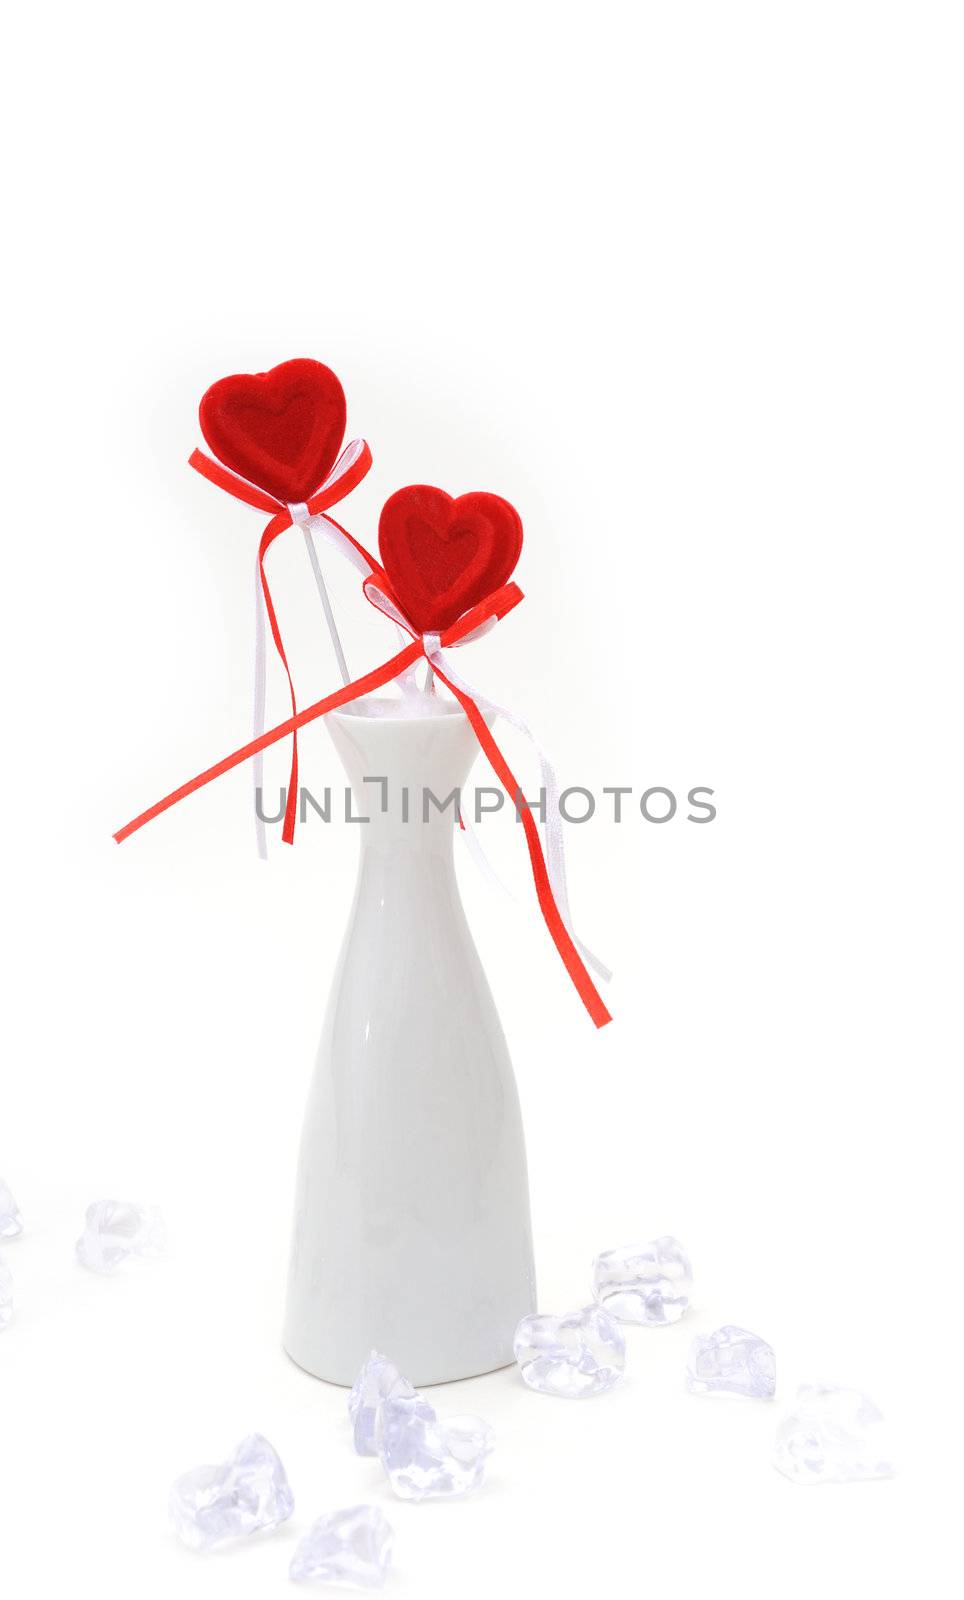 Two red plush hearts in white vase with cuts ice around on white background.